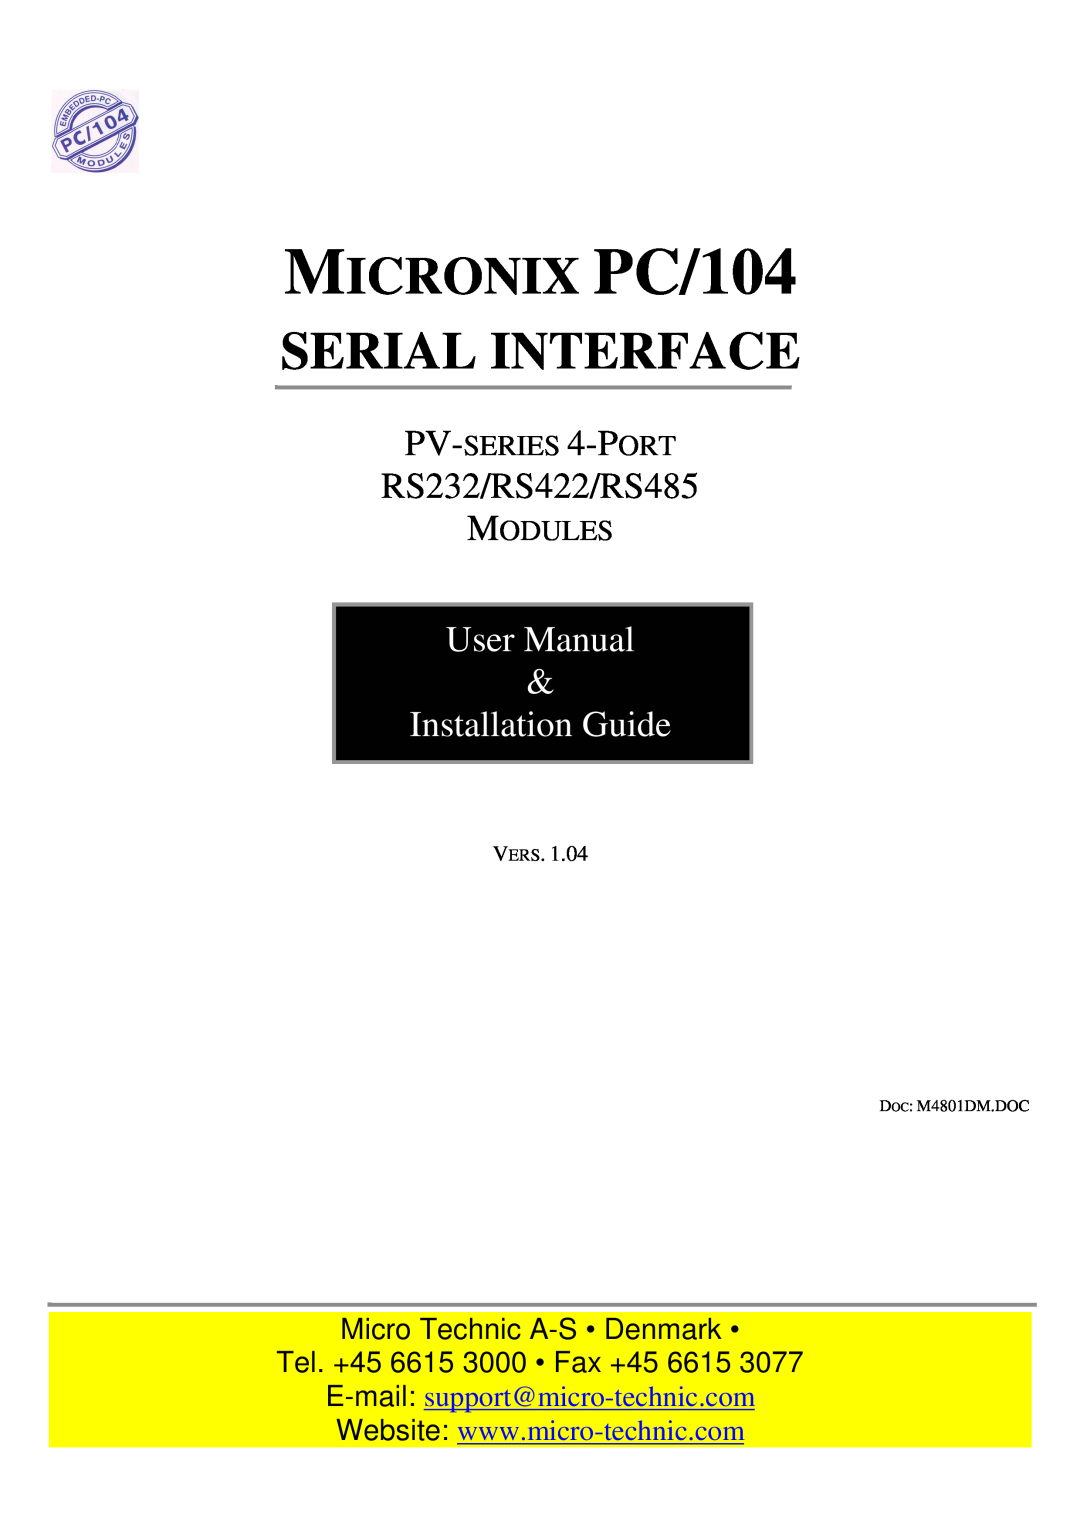 Micro Technic user manual Vers, MICRONIX PC/104 SERIAL INTERFACE, RS232/RS422/RS485, Installation Guide, Modules 